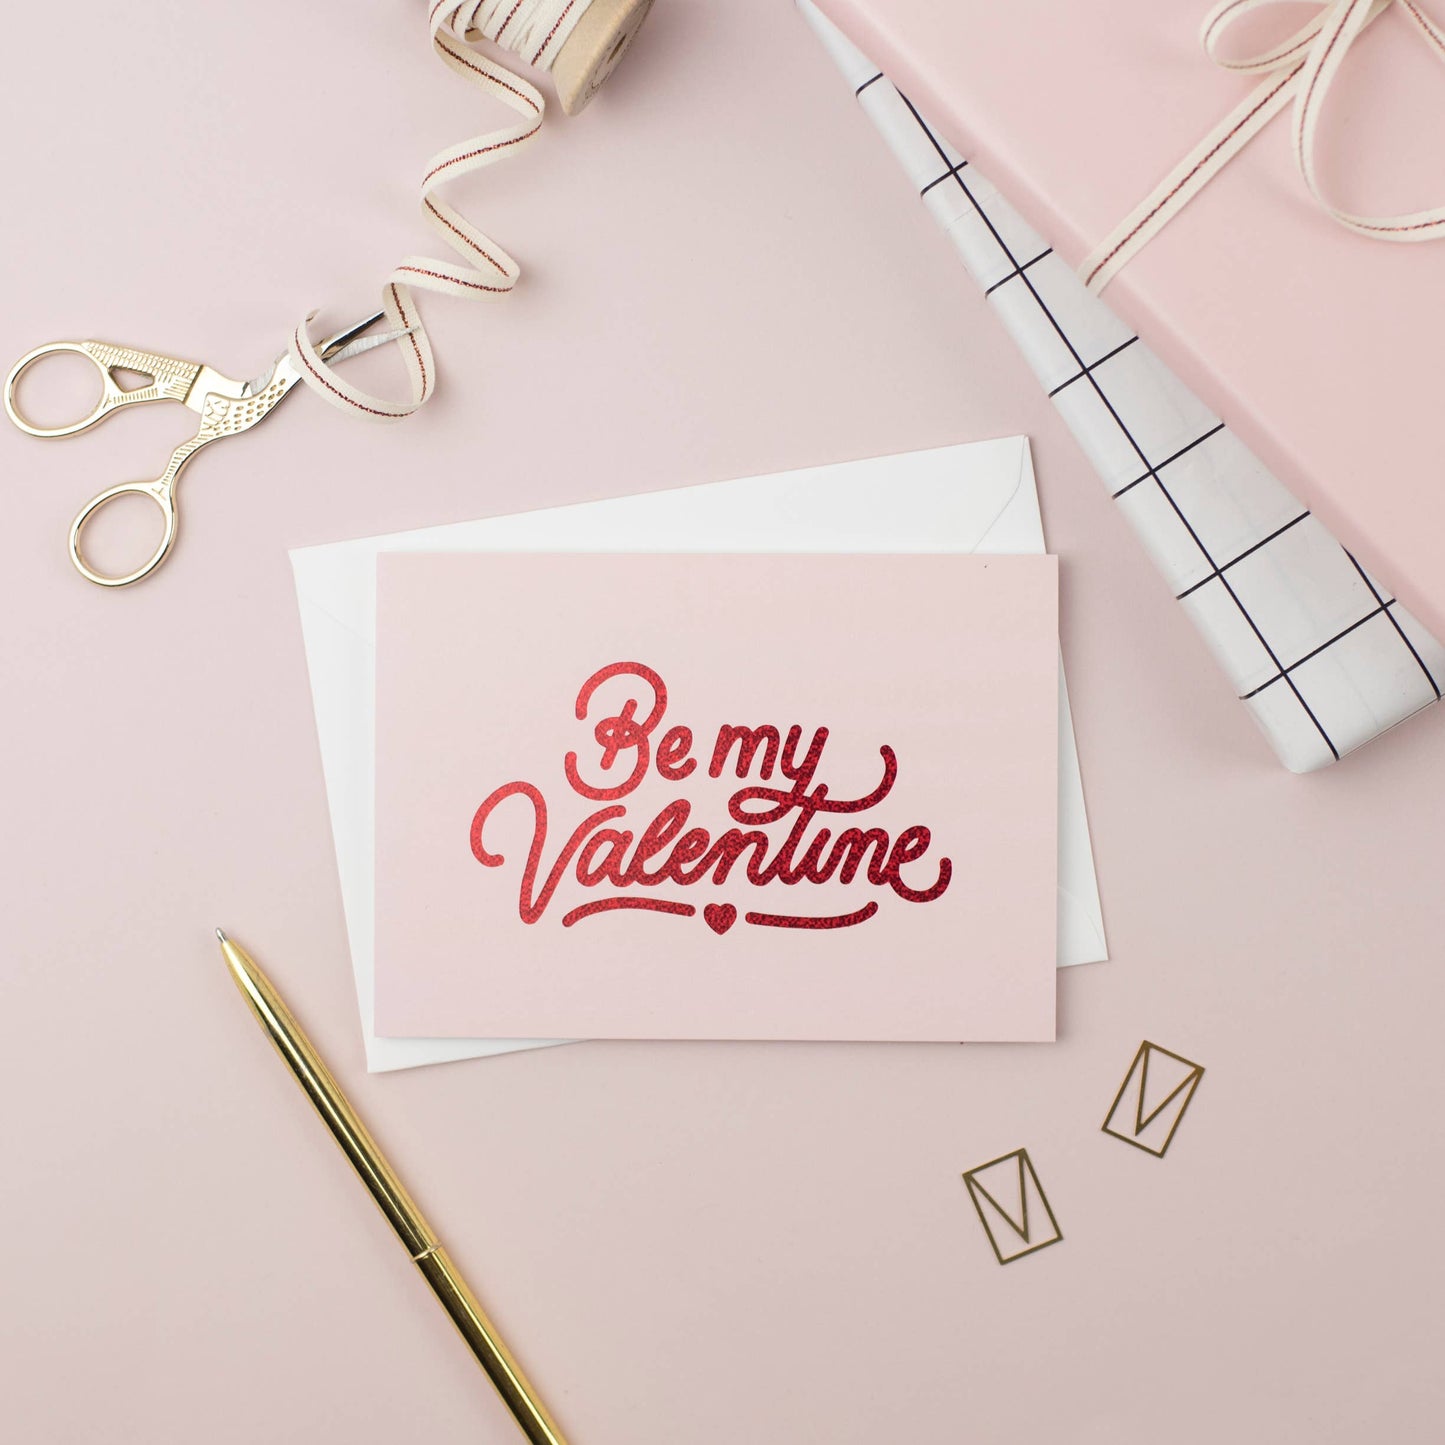 Ricicle Cards - Be My Valentine Card